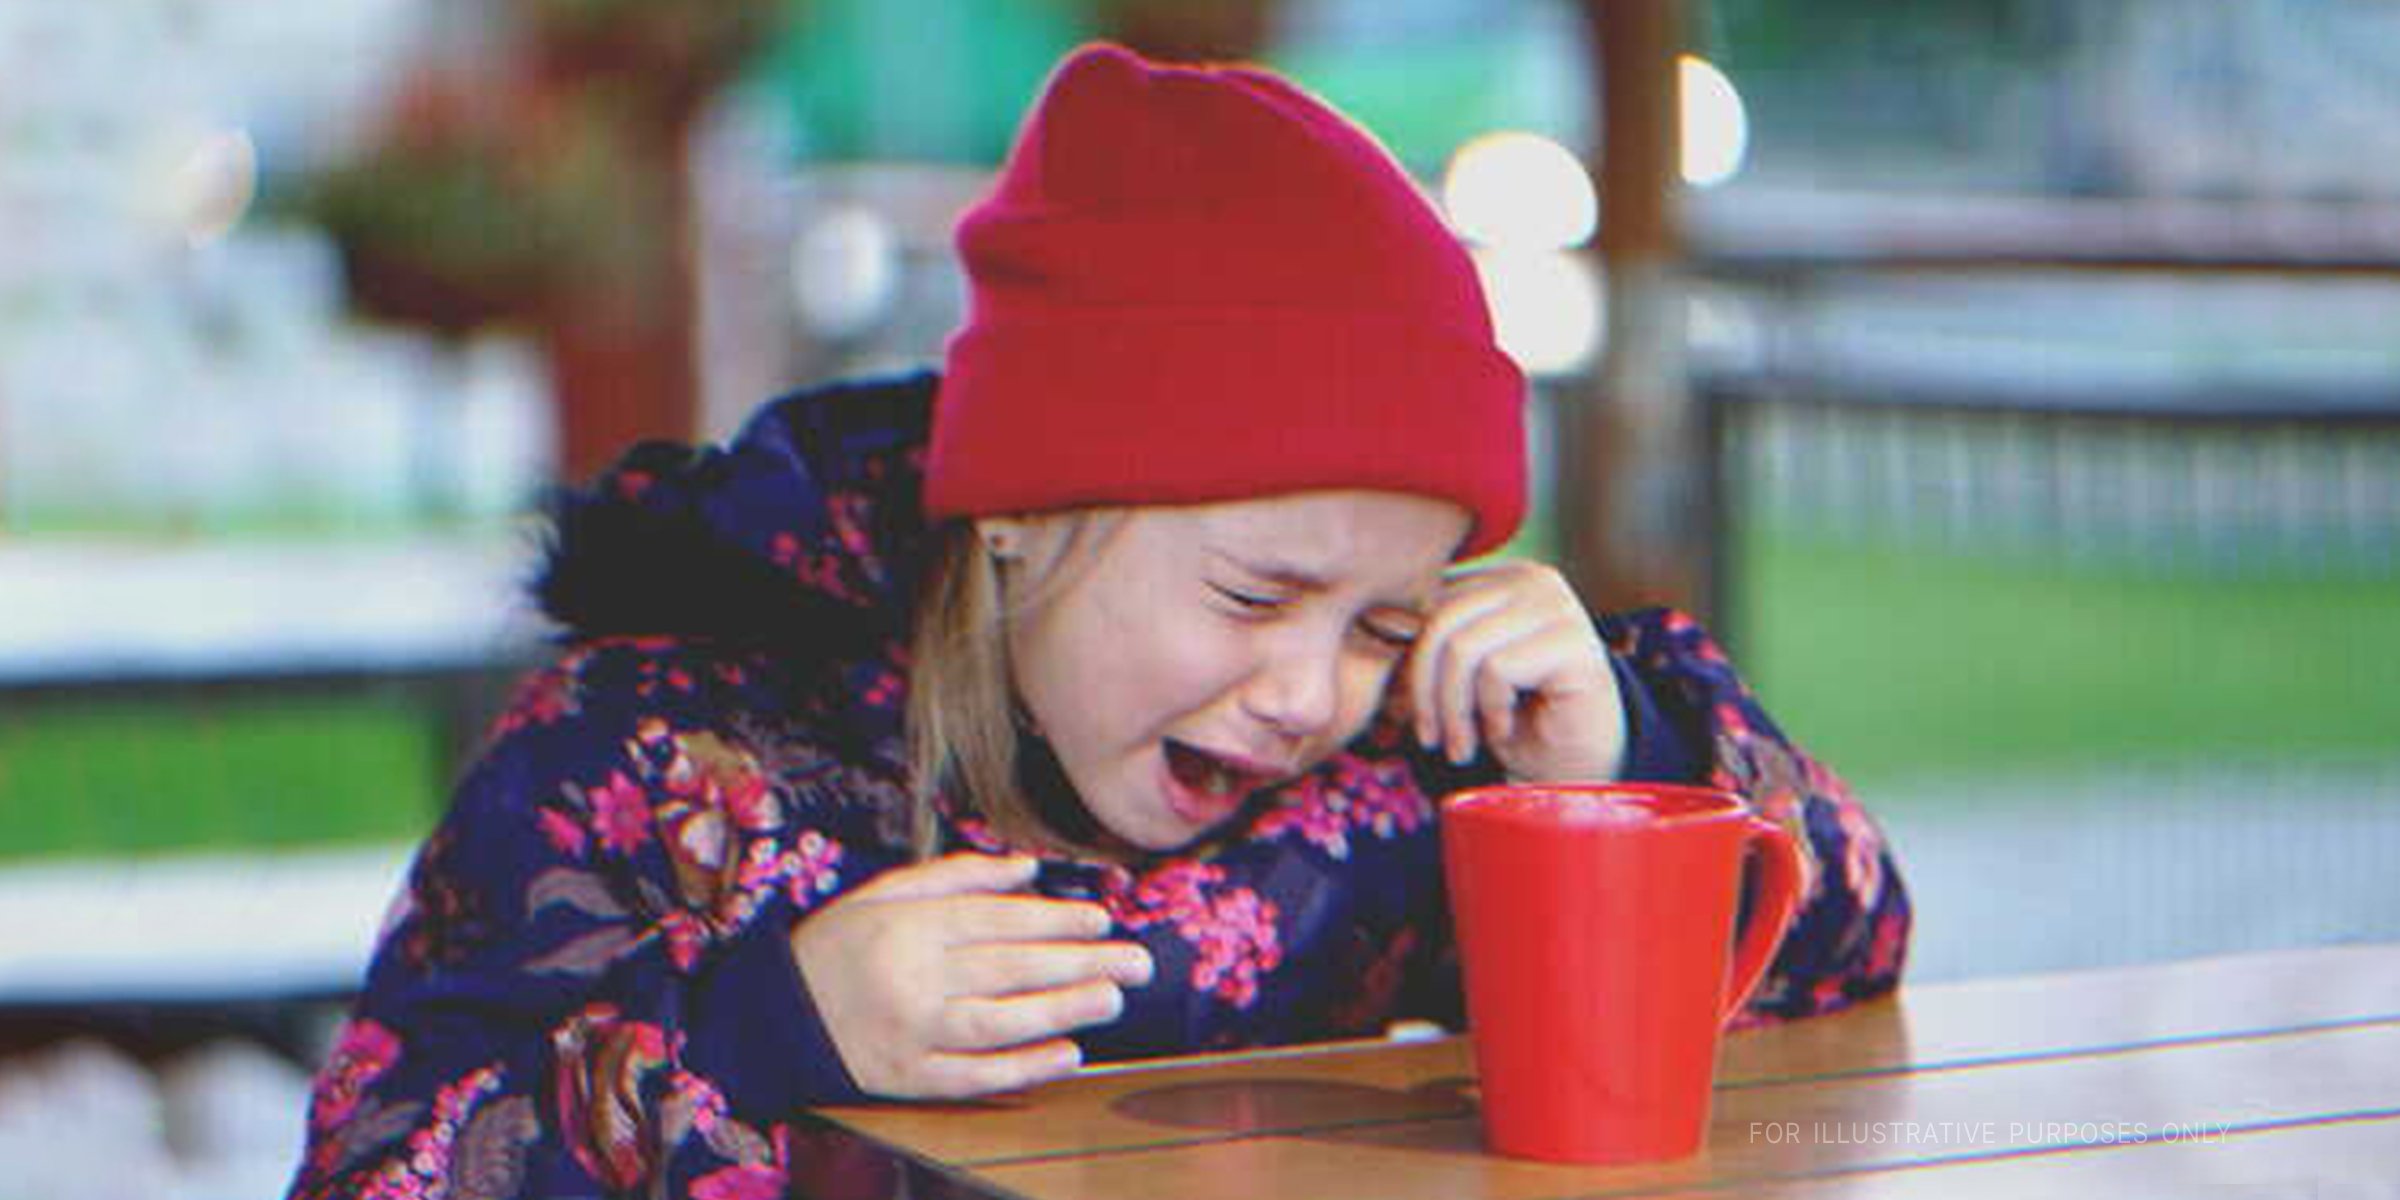 Little girl crying | Source: Shutterstock